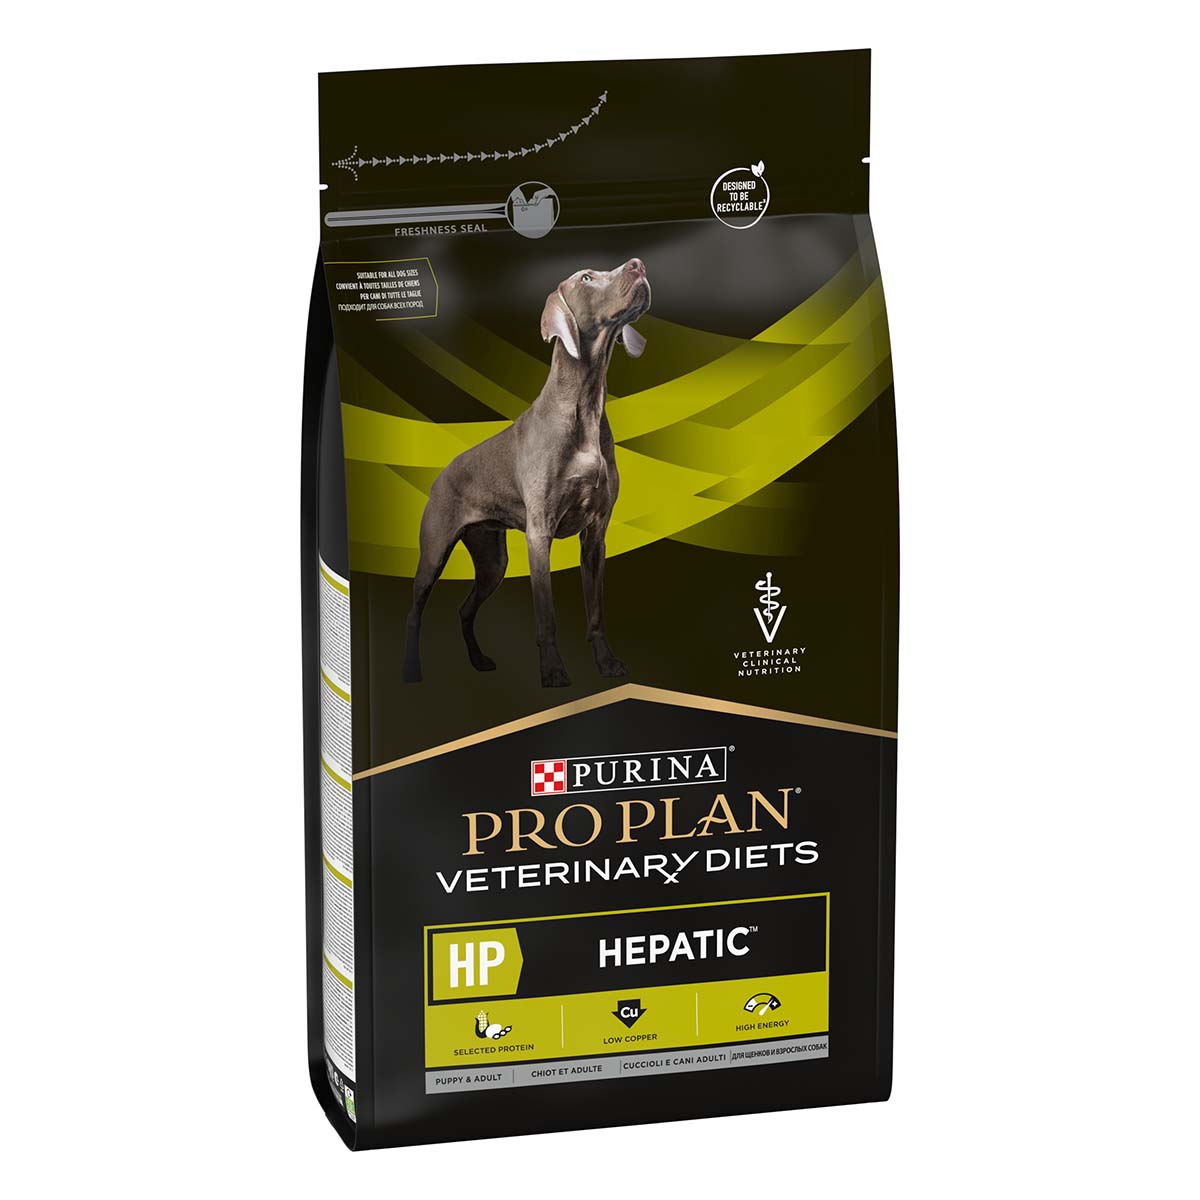 PPVD CANINE HP - HEPATIC 3kg